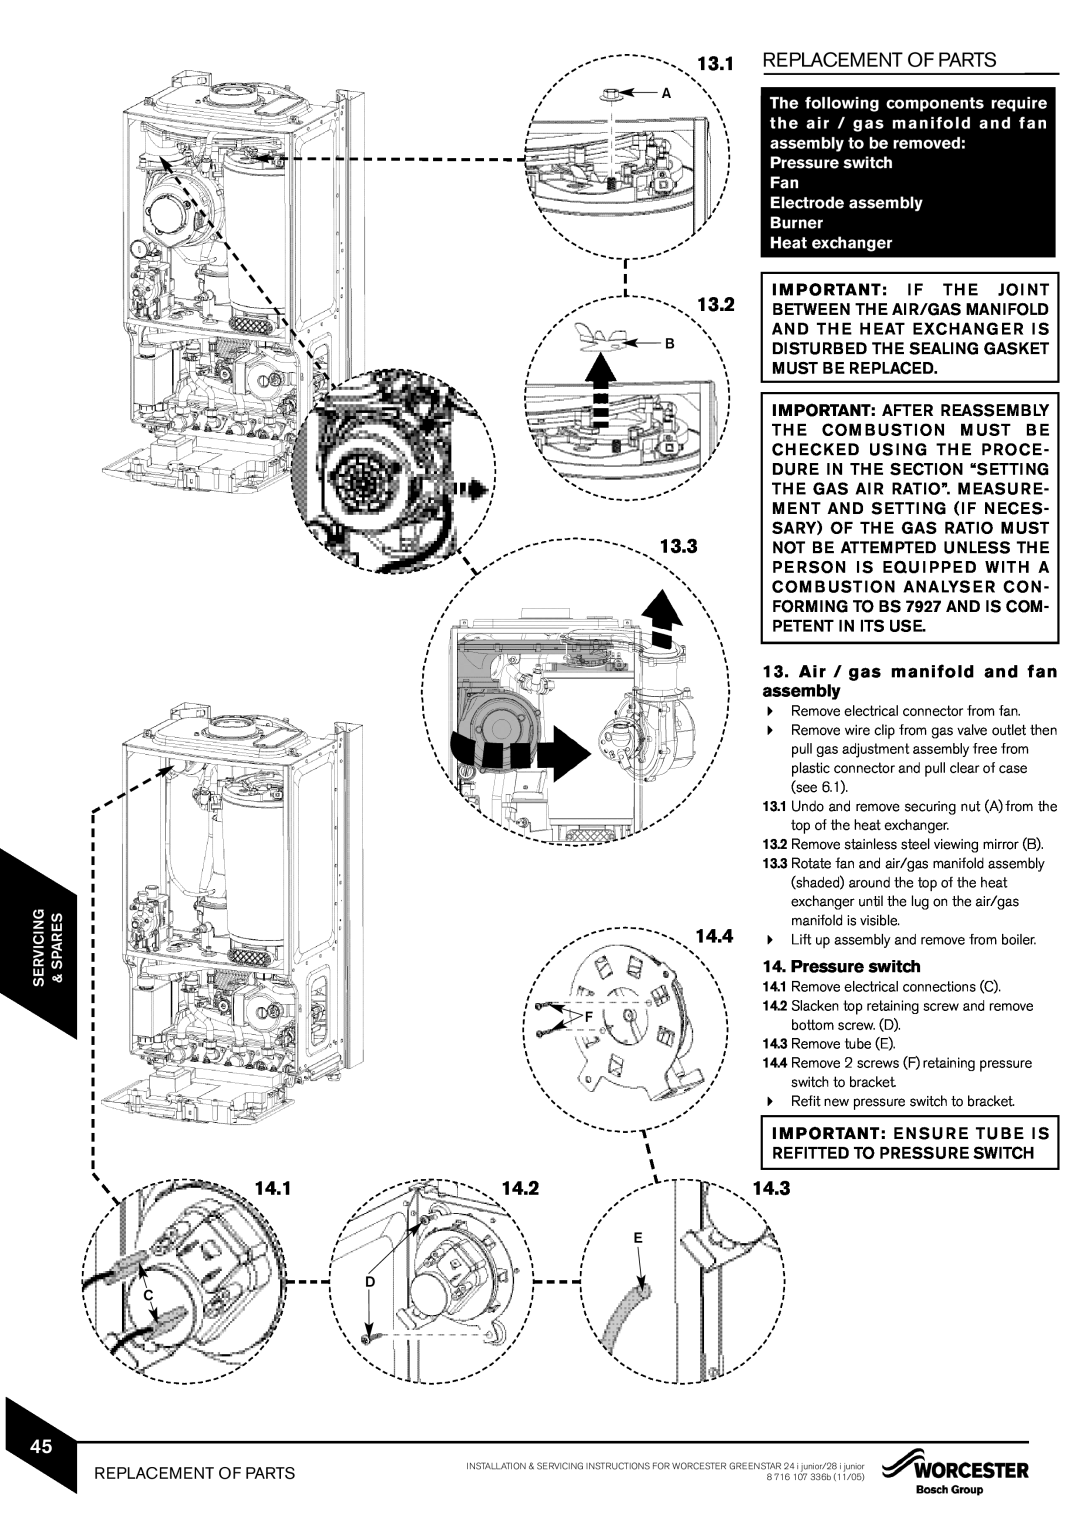 Bosch Appliances 28i junior manual Replacement Of Parts, 13.2, 13.3, 14.4, 14.1 14.2, Air / gas manifold and fan, assembly 